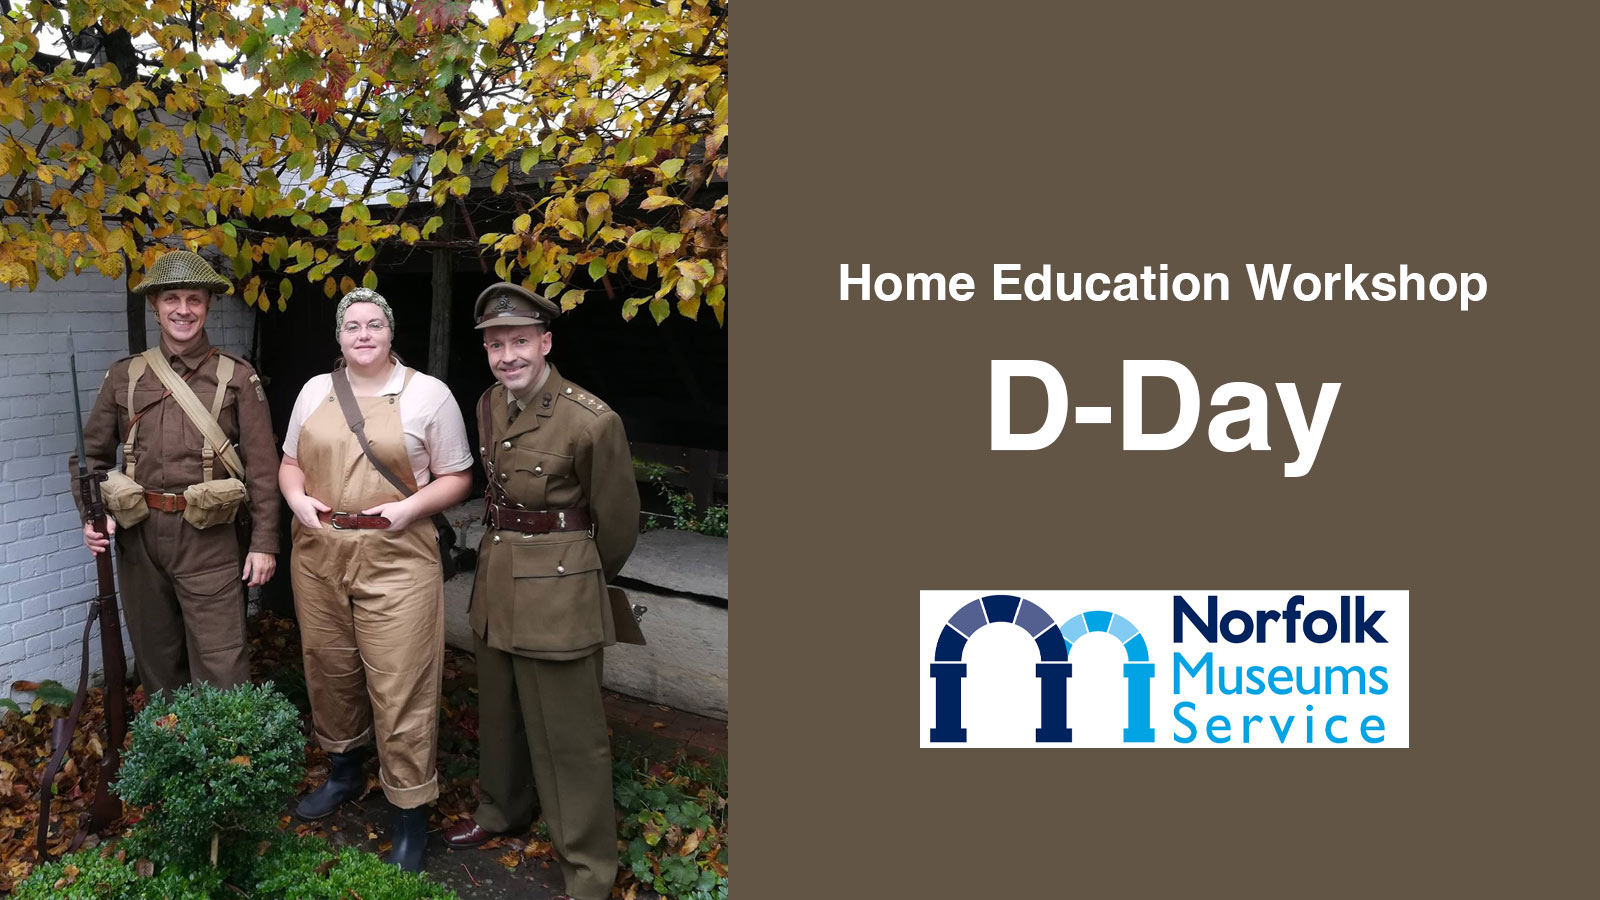 Thetford Bubbly Hub What's On and Events D-Day Workshop Home Education at Ancient House Museum